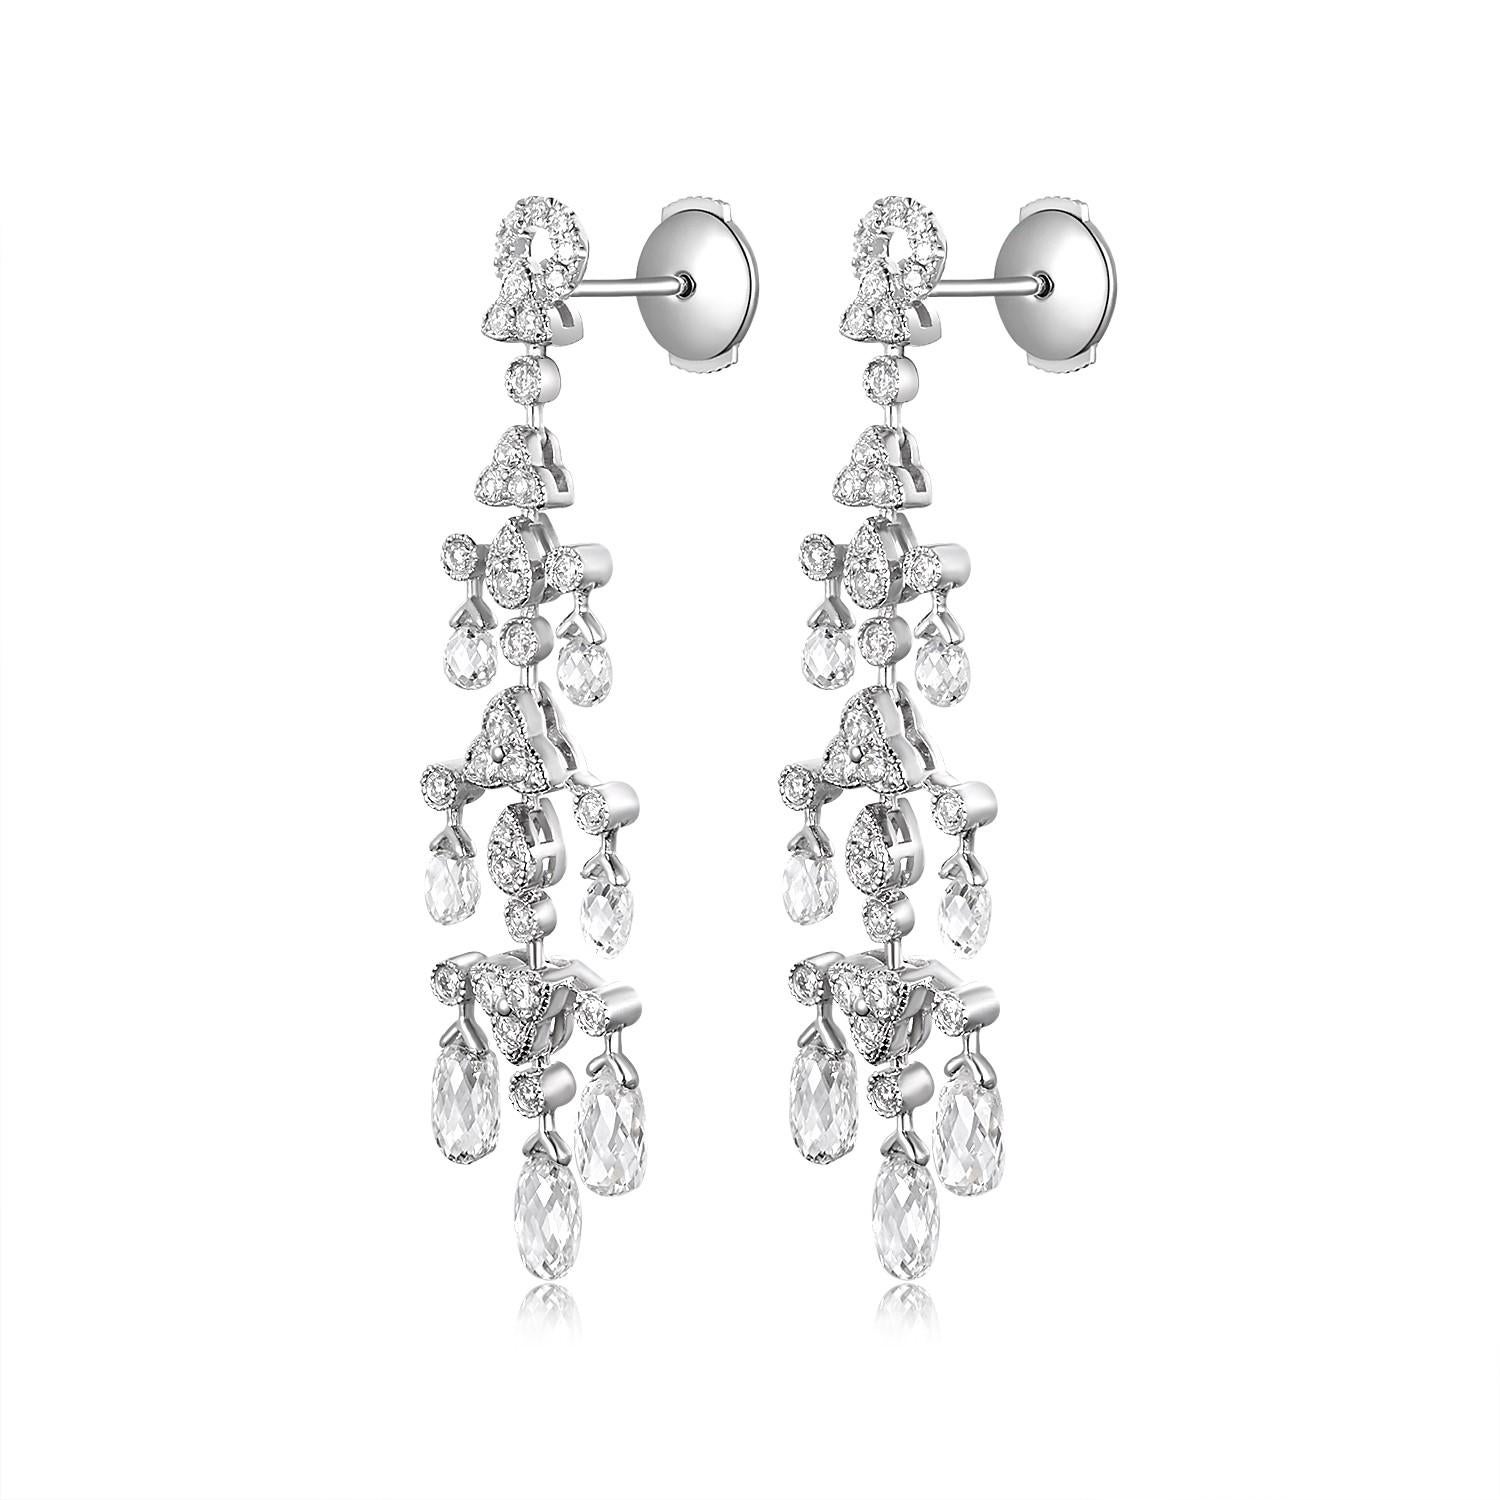 These Vintage 4.83Ct Briolette Diamond Dangle Earrings are an embodiment of classic luxury combined with an exquisite touch of timeless elegance. Crafted meticulously in 18K white gold, they flaunt a lavish design that radiates with a sparkle that's